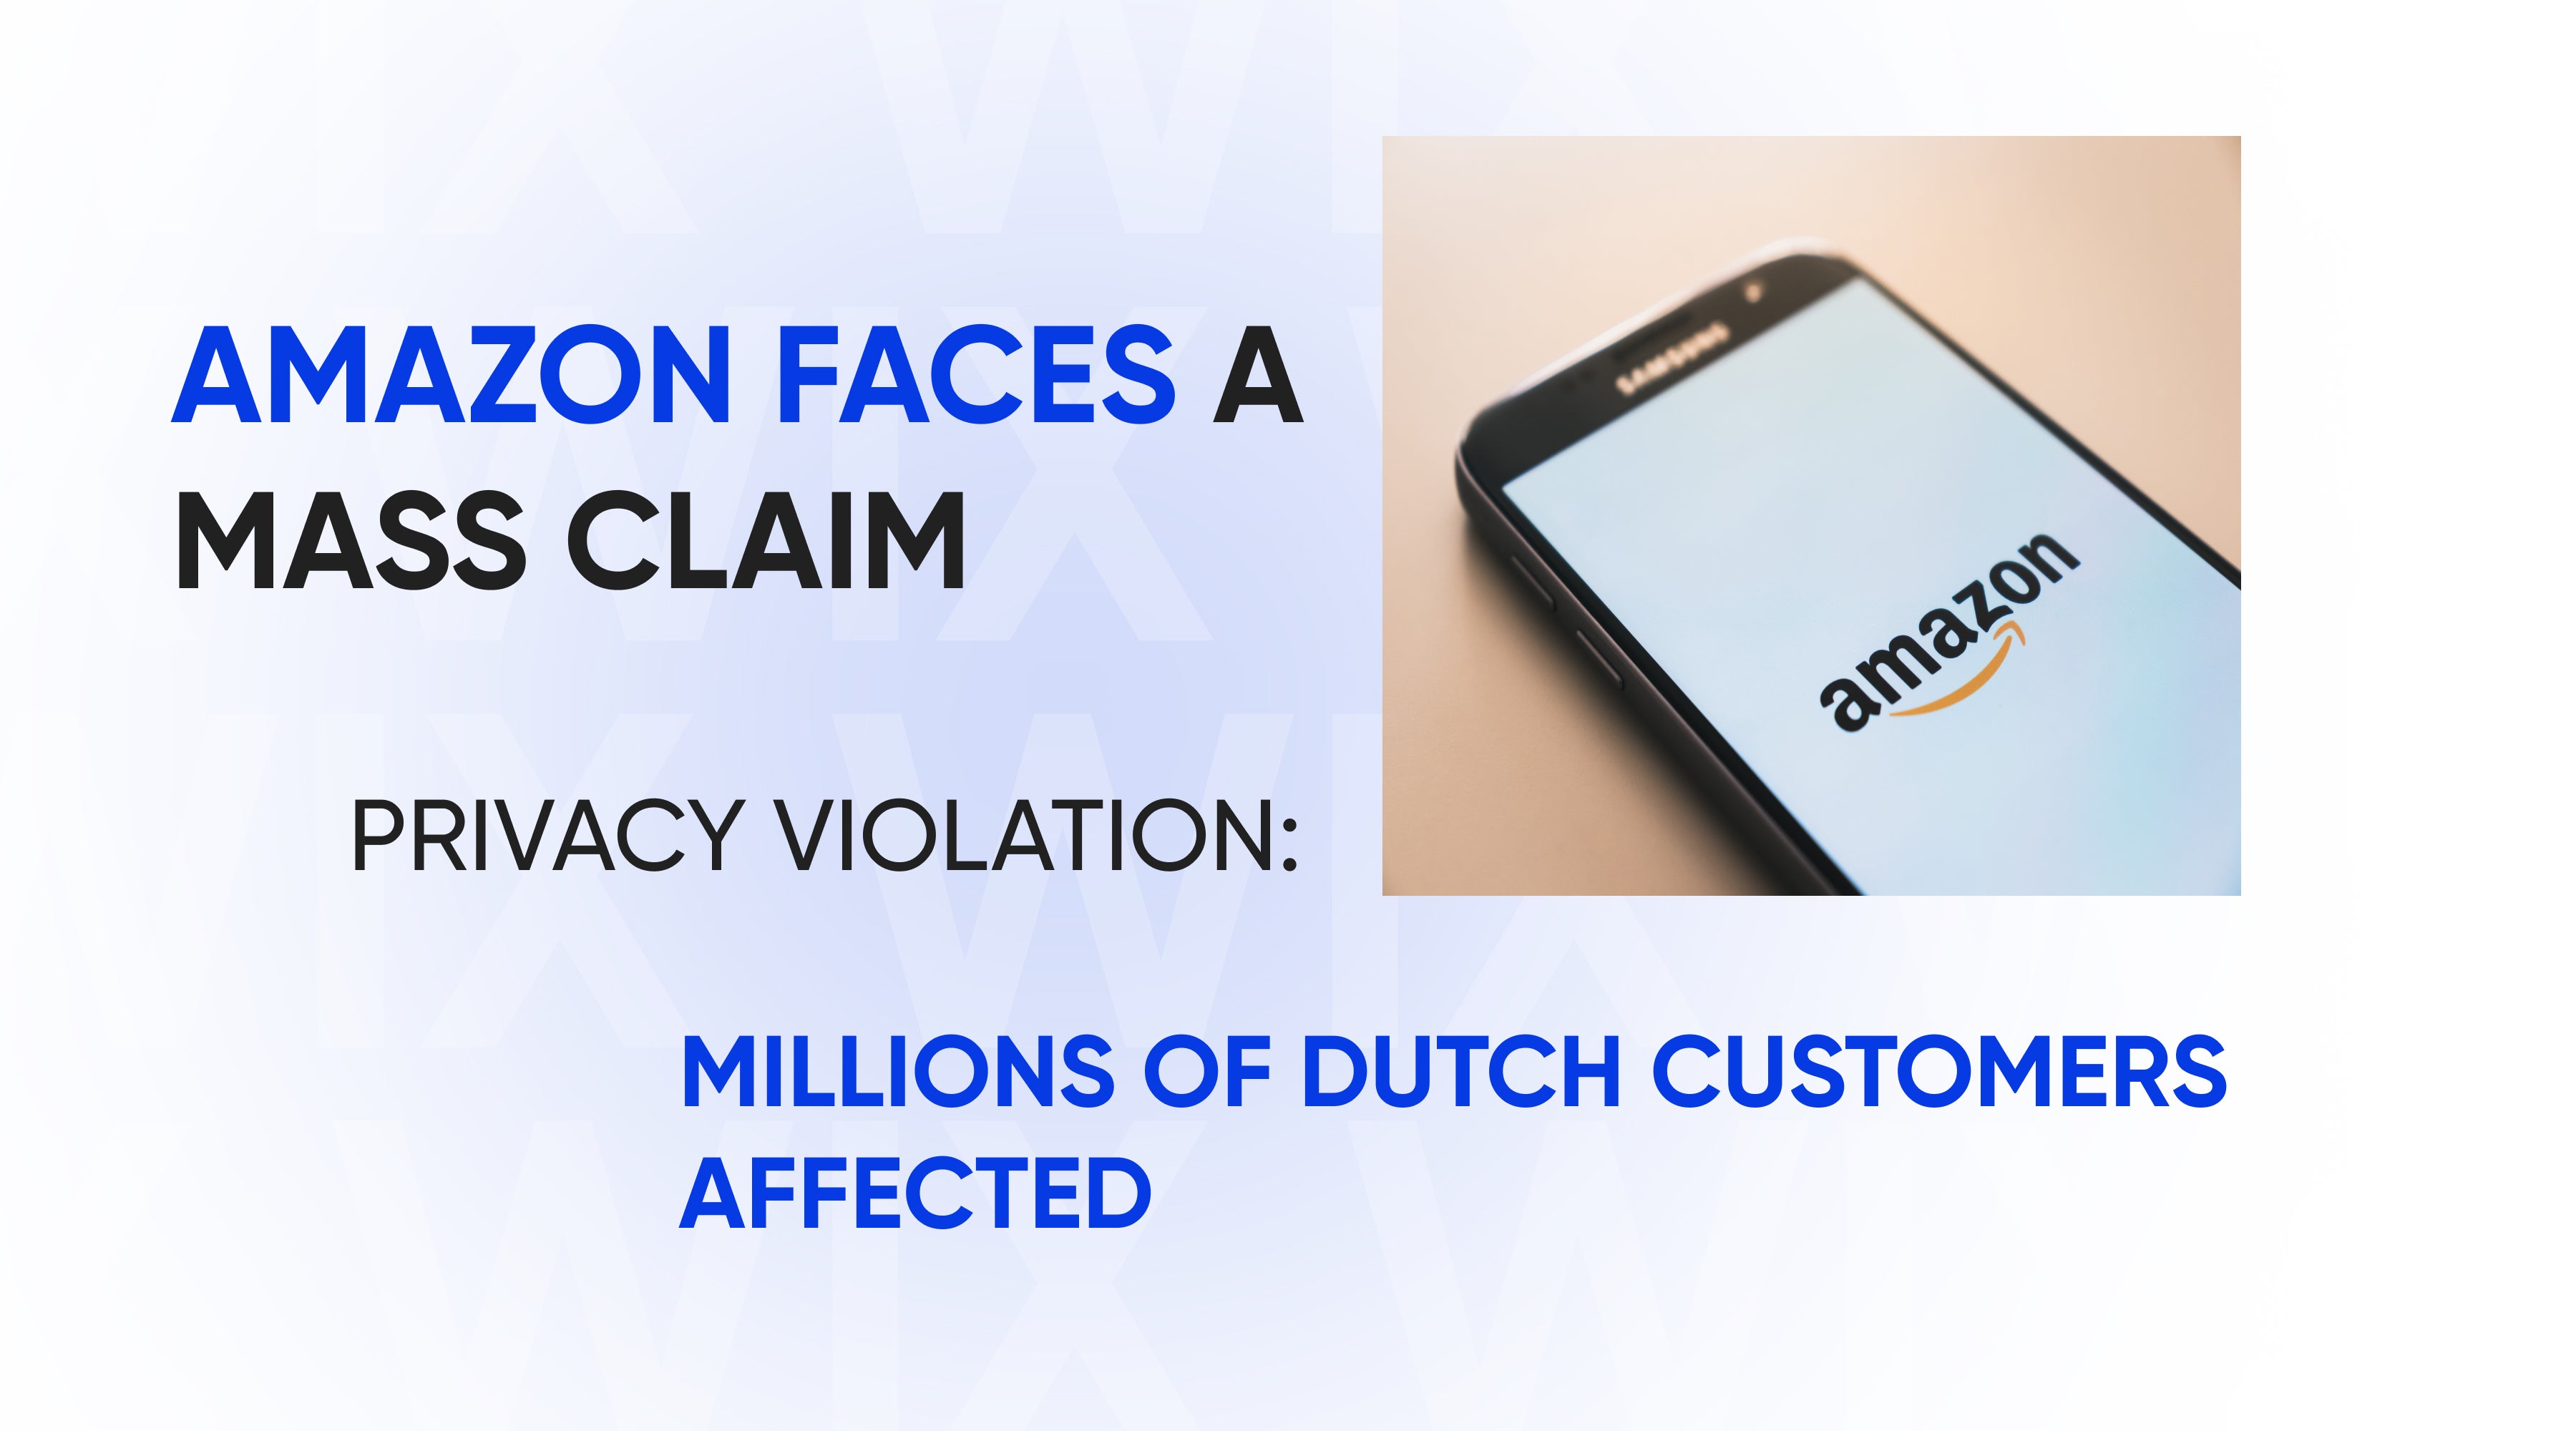 Amazon faces a mass claim for privacy violation: millions of Dutch customers affected